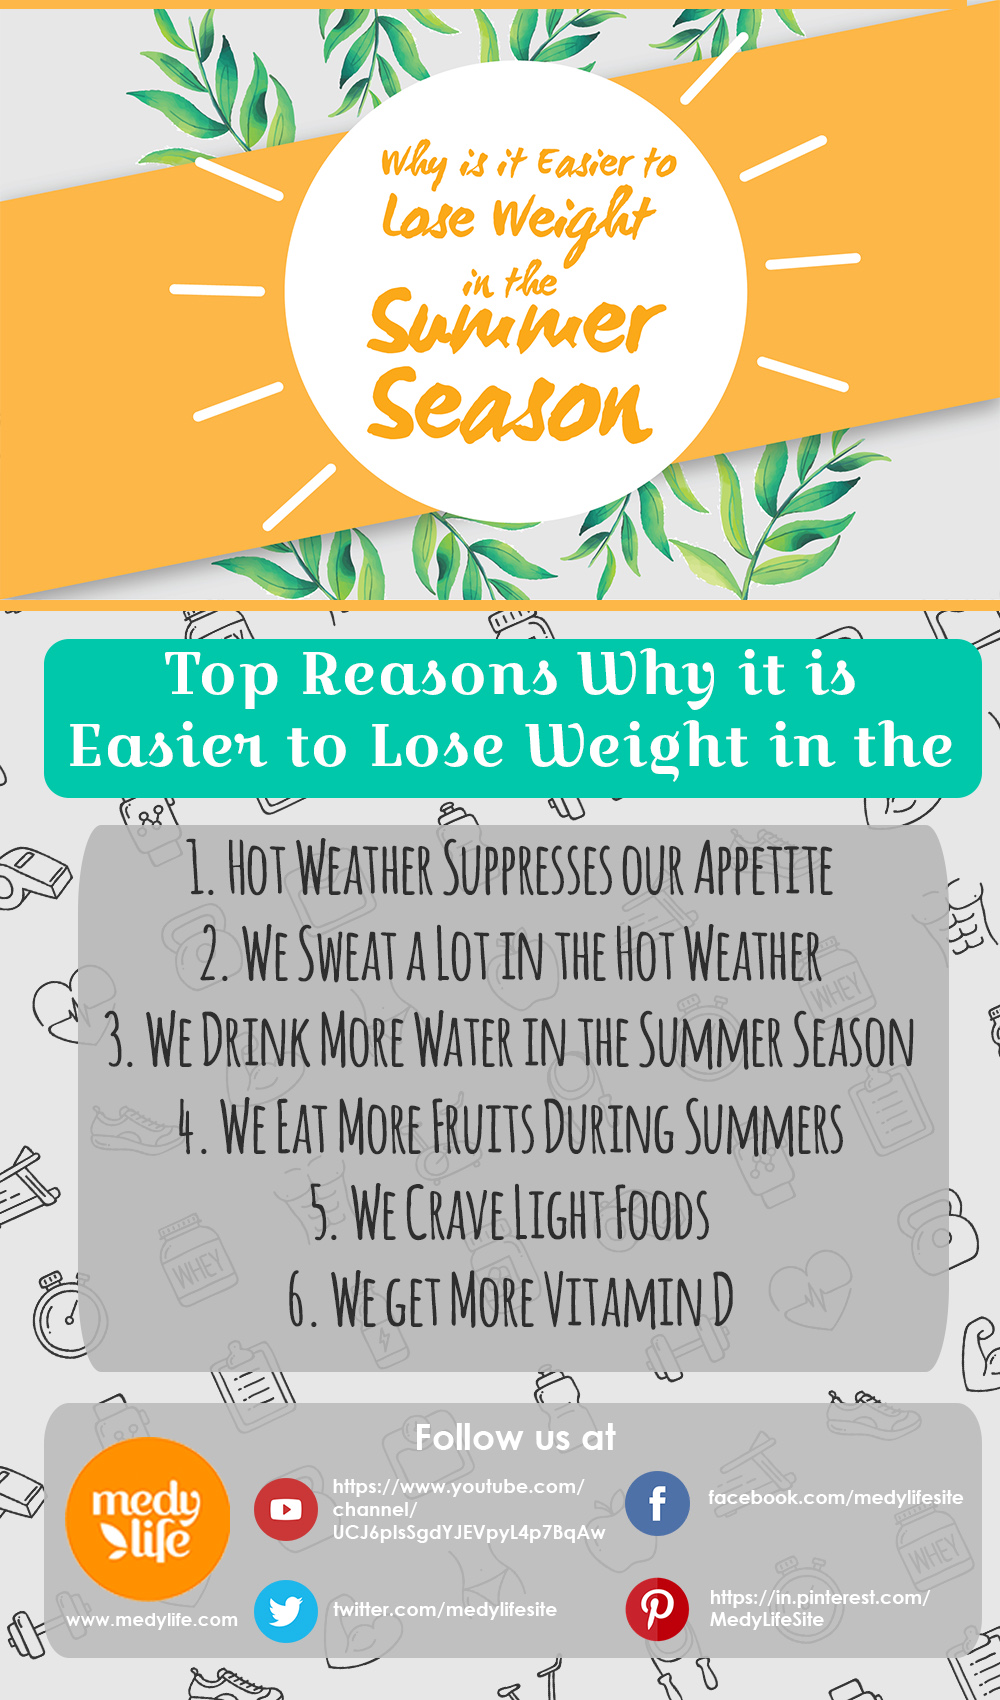 Why is it Easier to Lose Weight in the Summer Season INFO